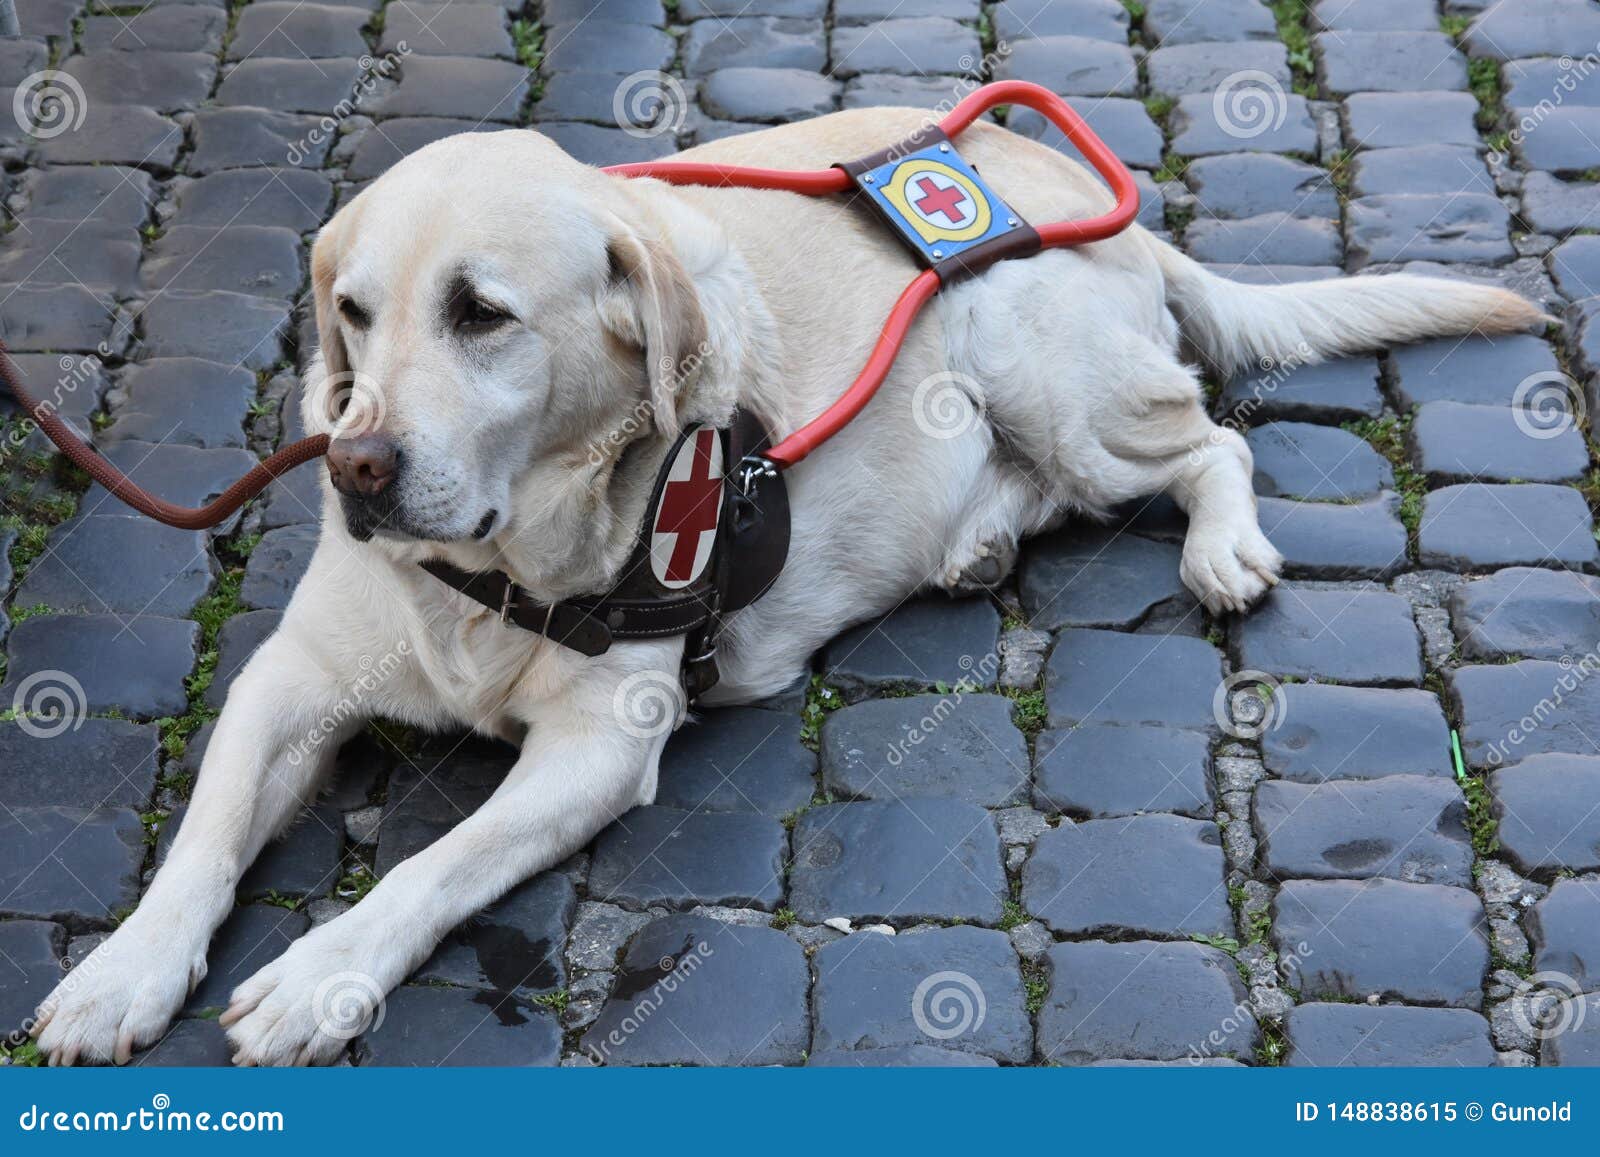 guide dog waits patiently with his handicapped man